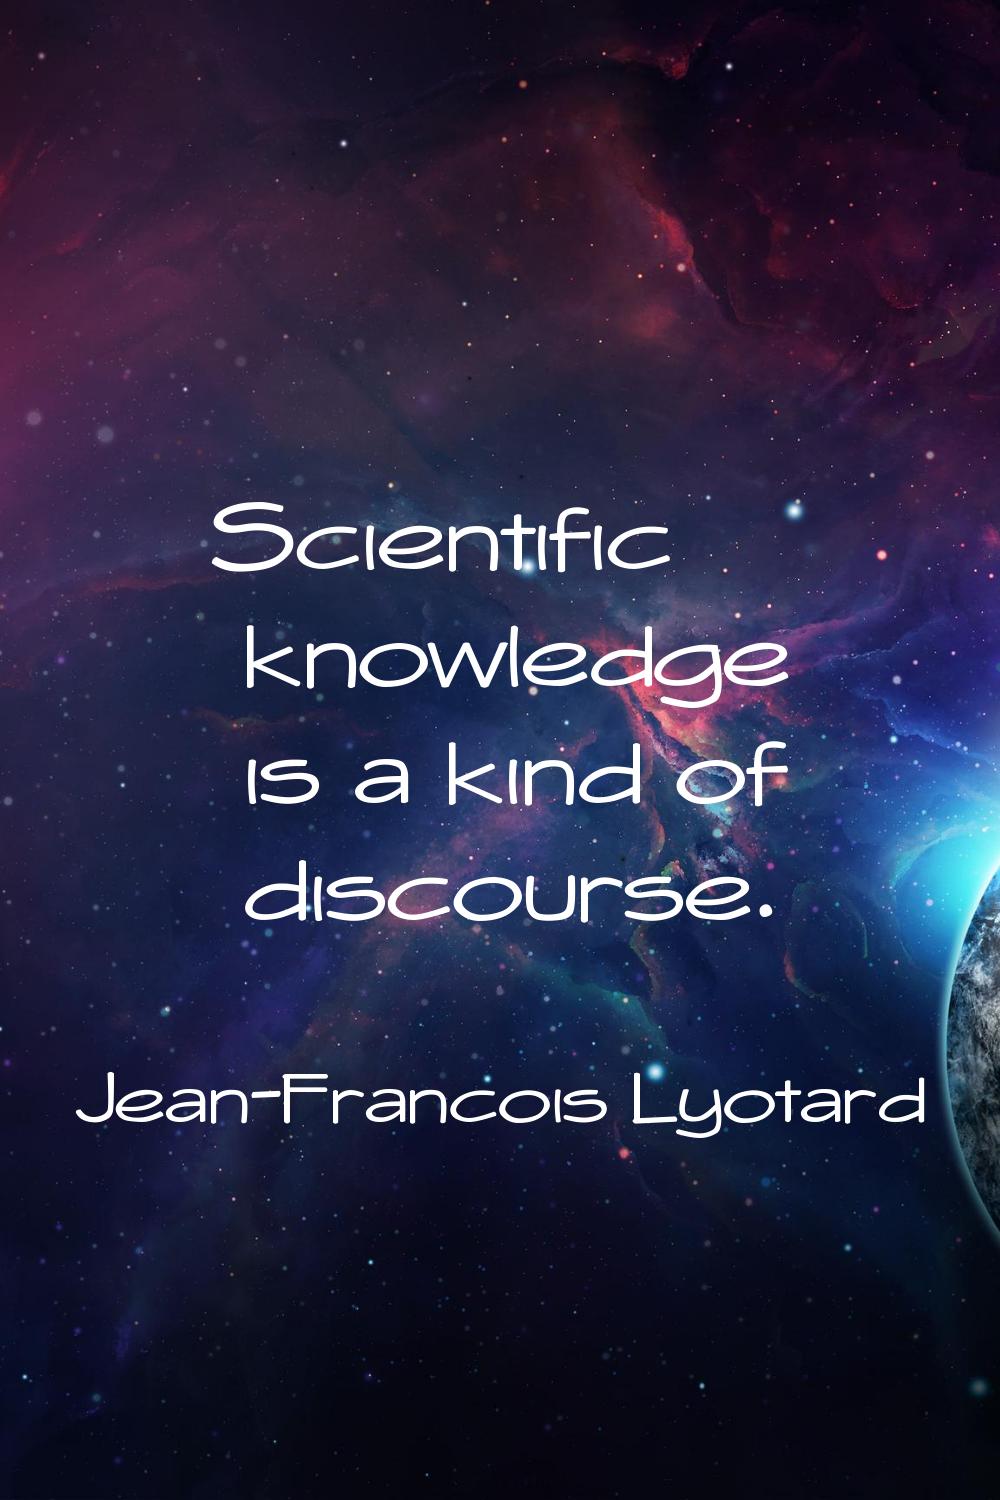 Scientific knowledge is a kind of discourse.